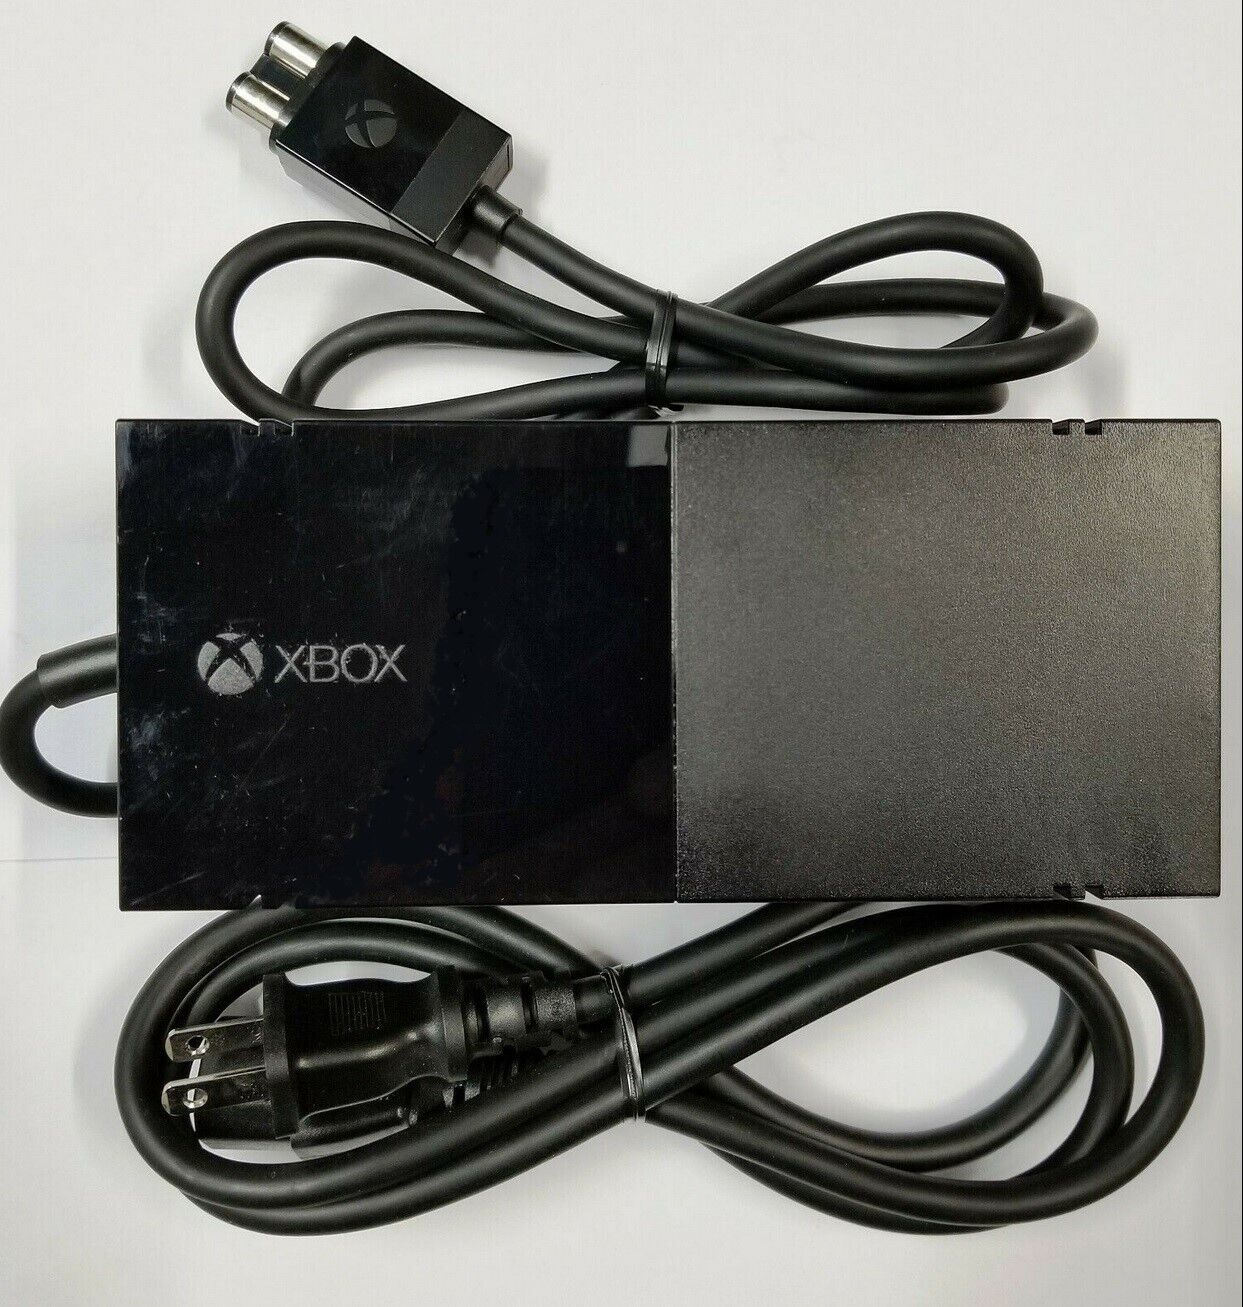 OFFICIAL MICROSOFT Xbox One Fat Power Supply AC Adapter-Not cheap Chinese clone! Model Microsoft Xbox One - Original Co